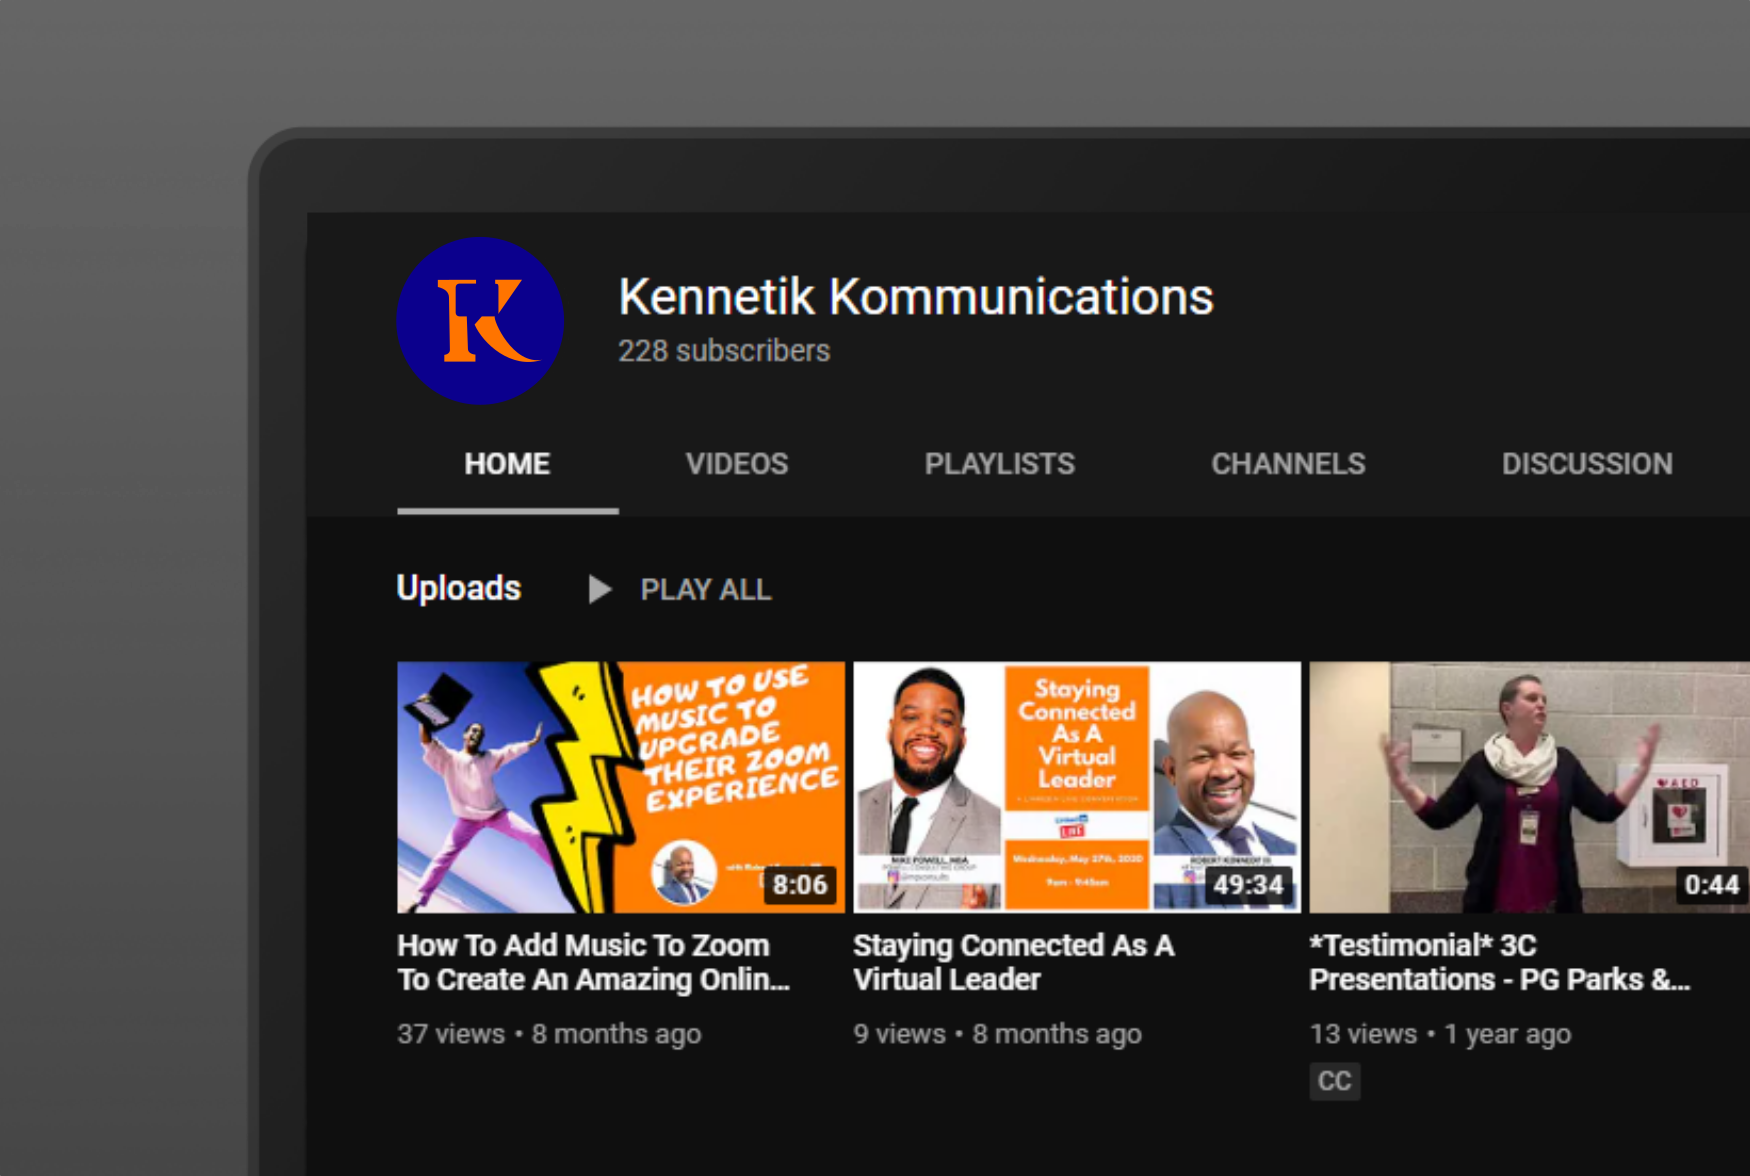 The logo as displayed on their Youtube channel